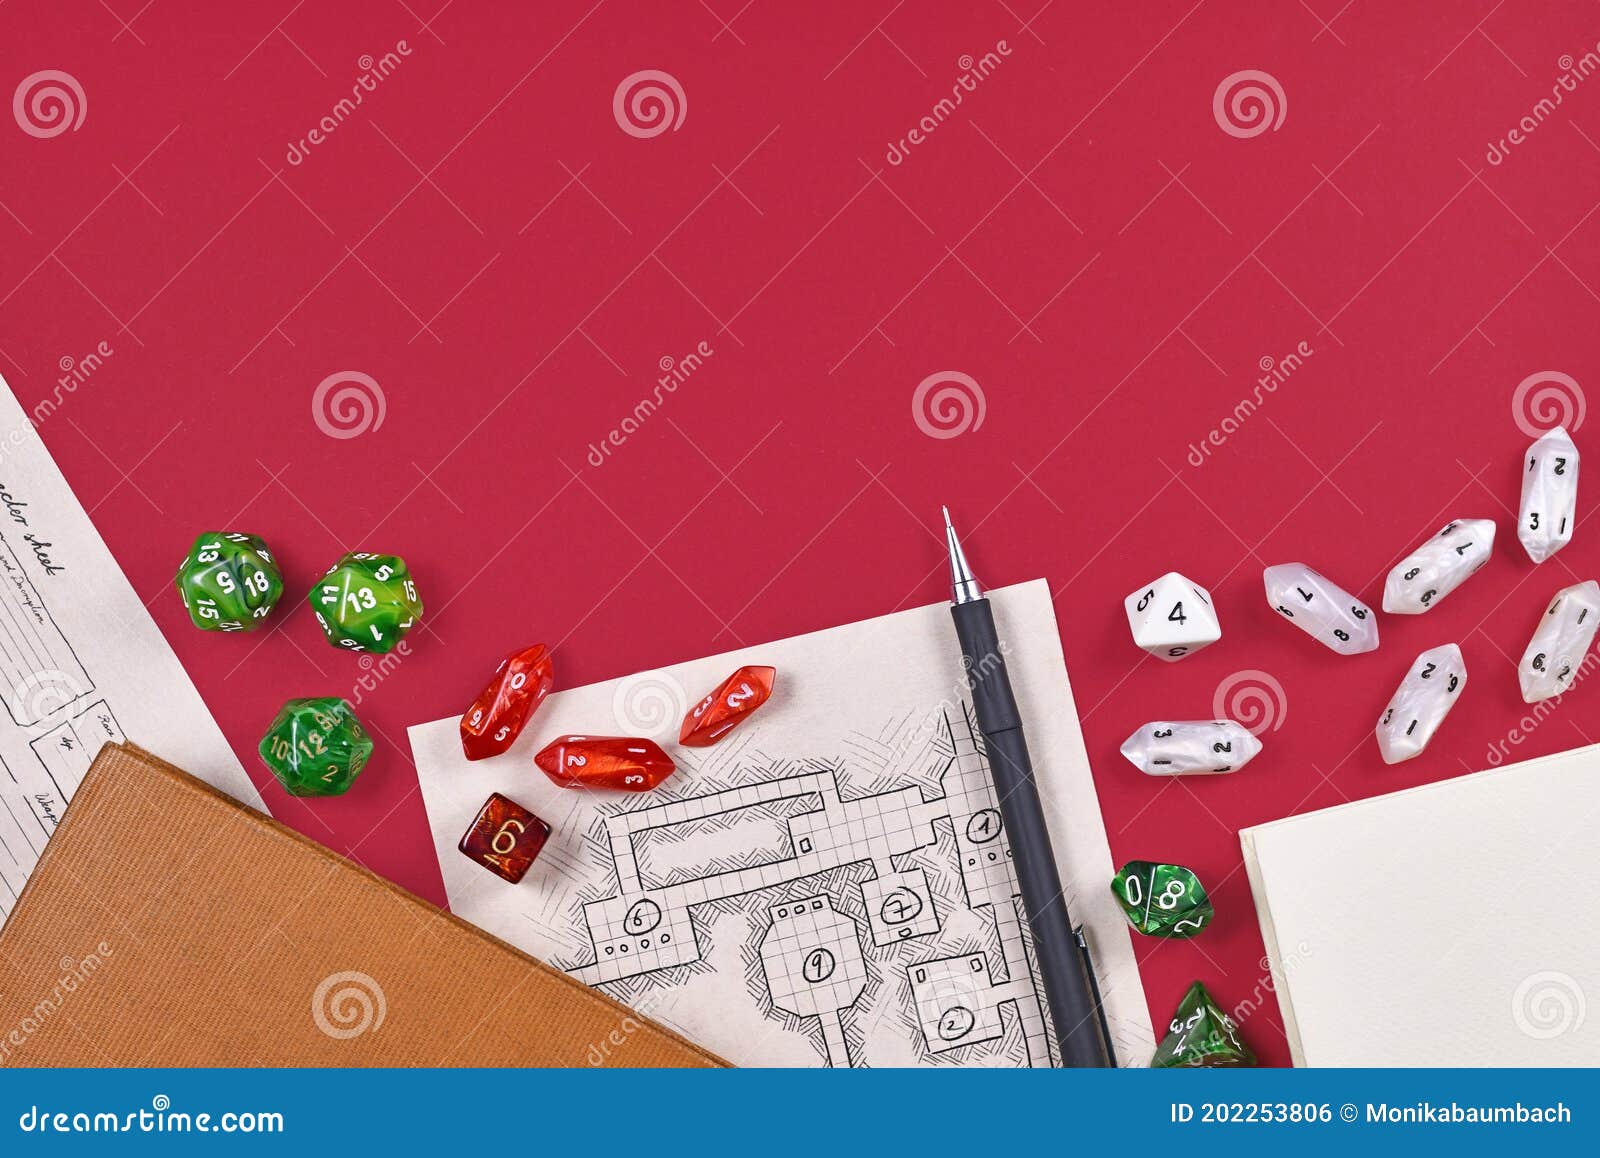 tabletop role playing flat lay with rpg game dices, hand drawn dungeon map, rule books and pen at bottom of red background